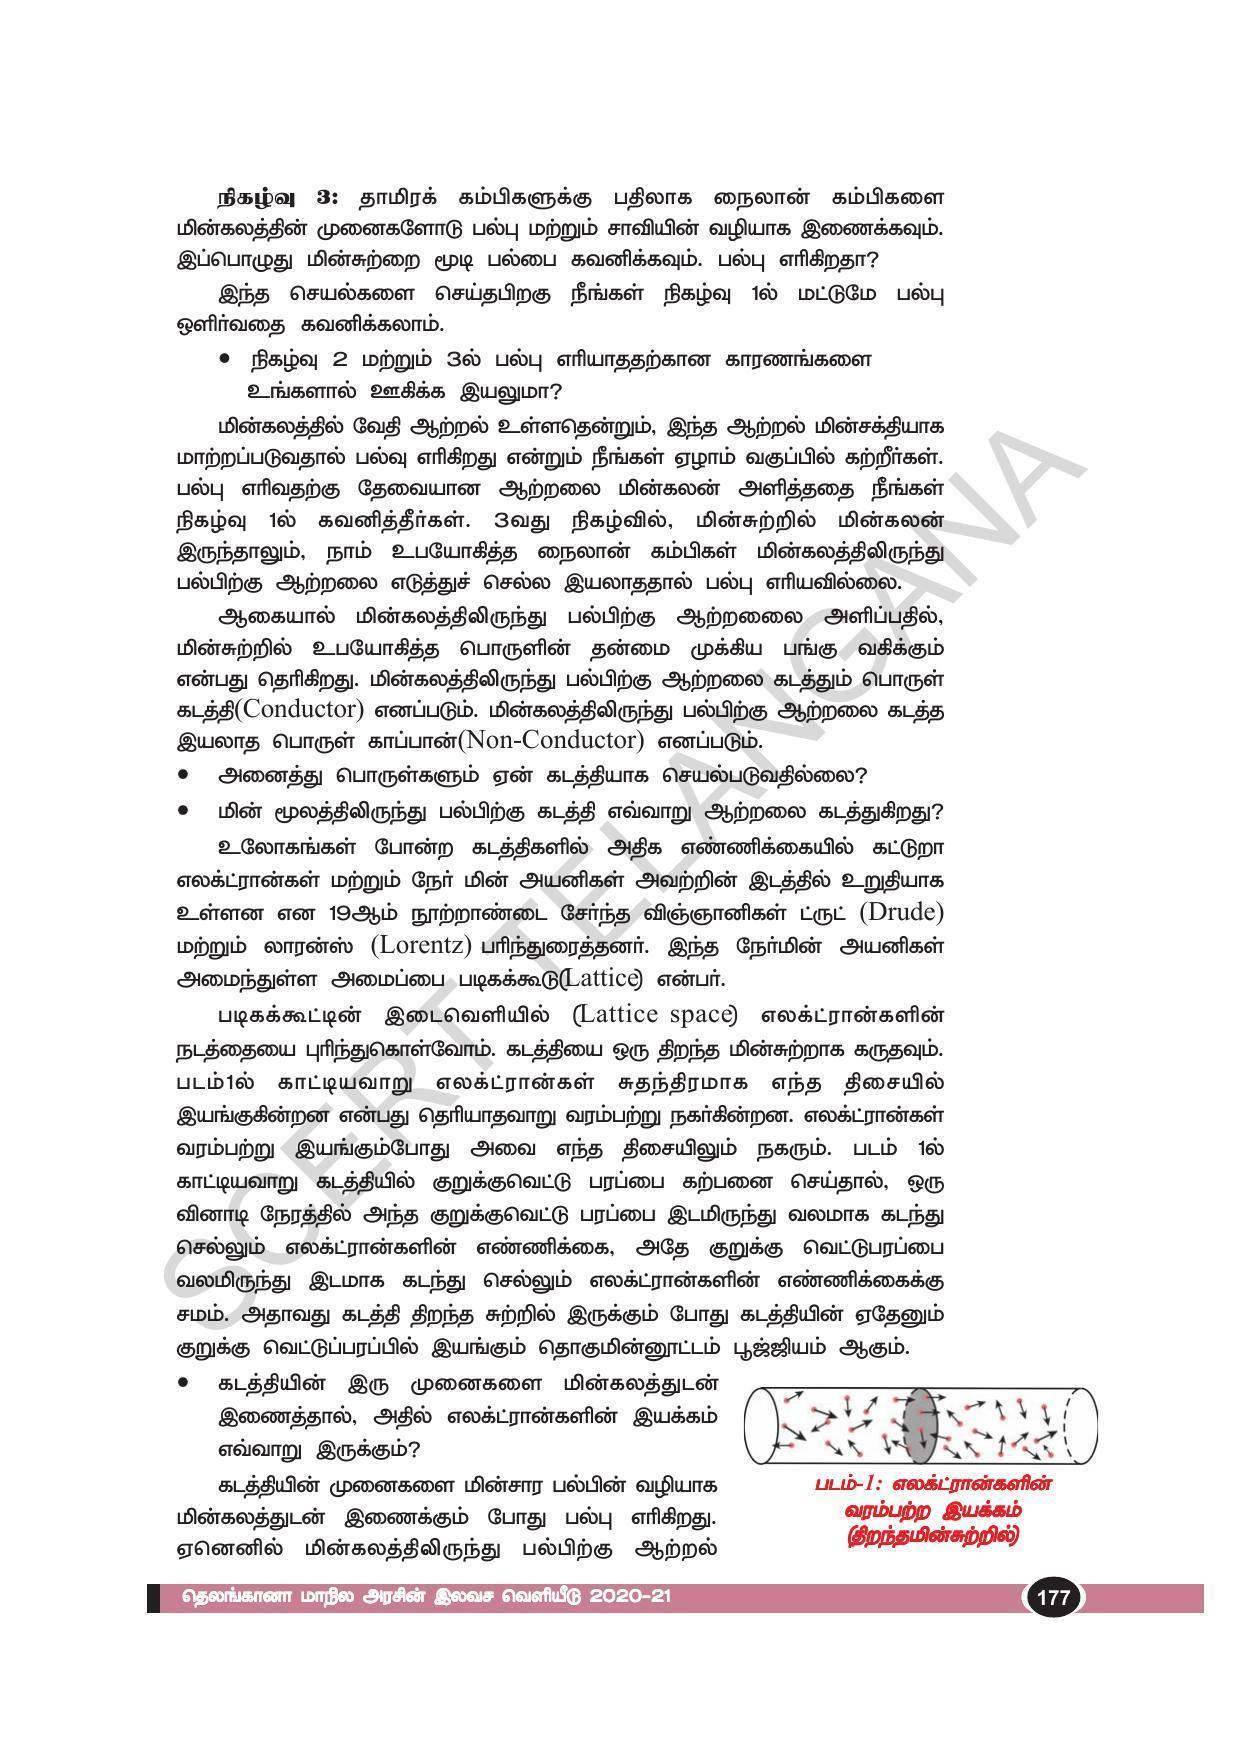 TS SCERT Class 10 Physical Science(Tamil Medium) Text Book - Page 189